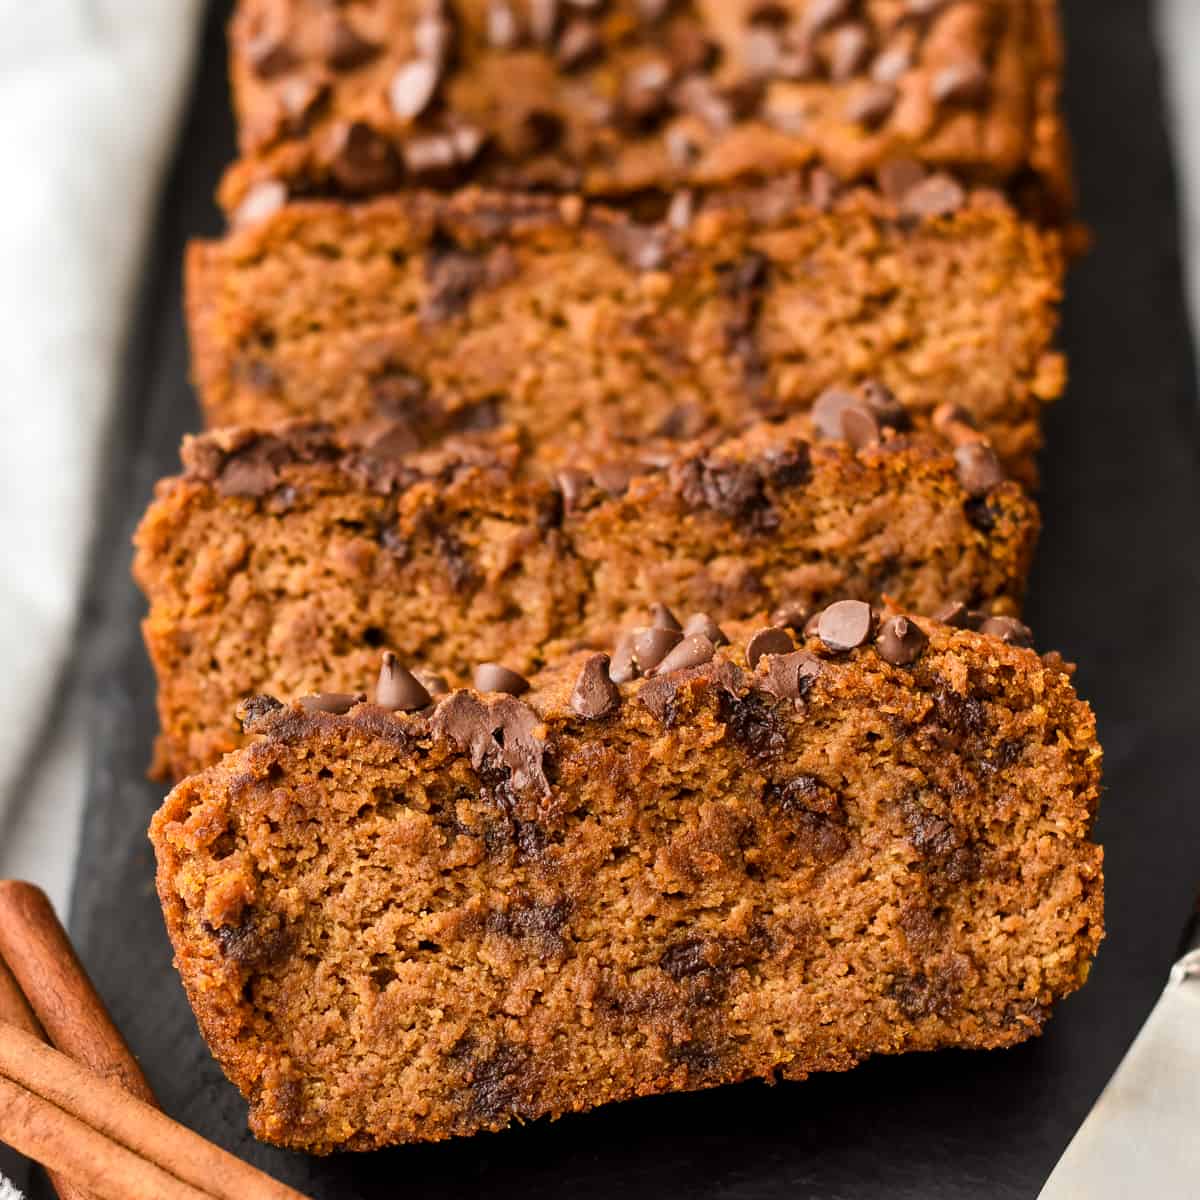 3 slices of paleo pumpkin bread with chocolate chips